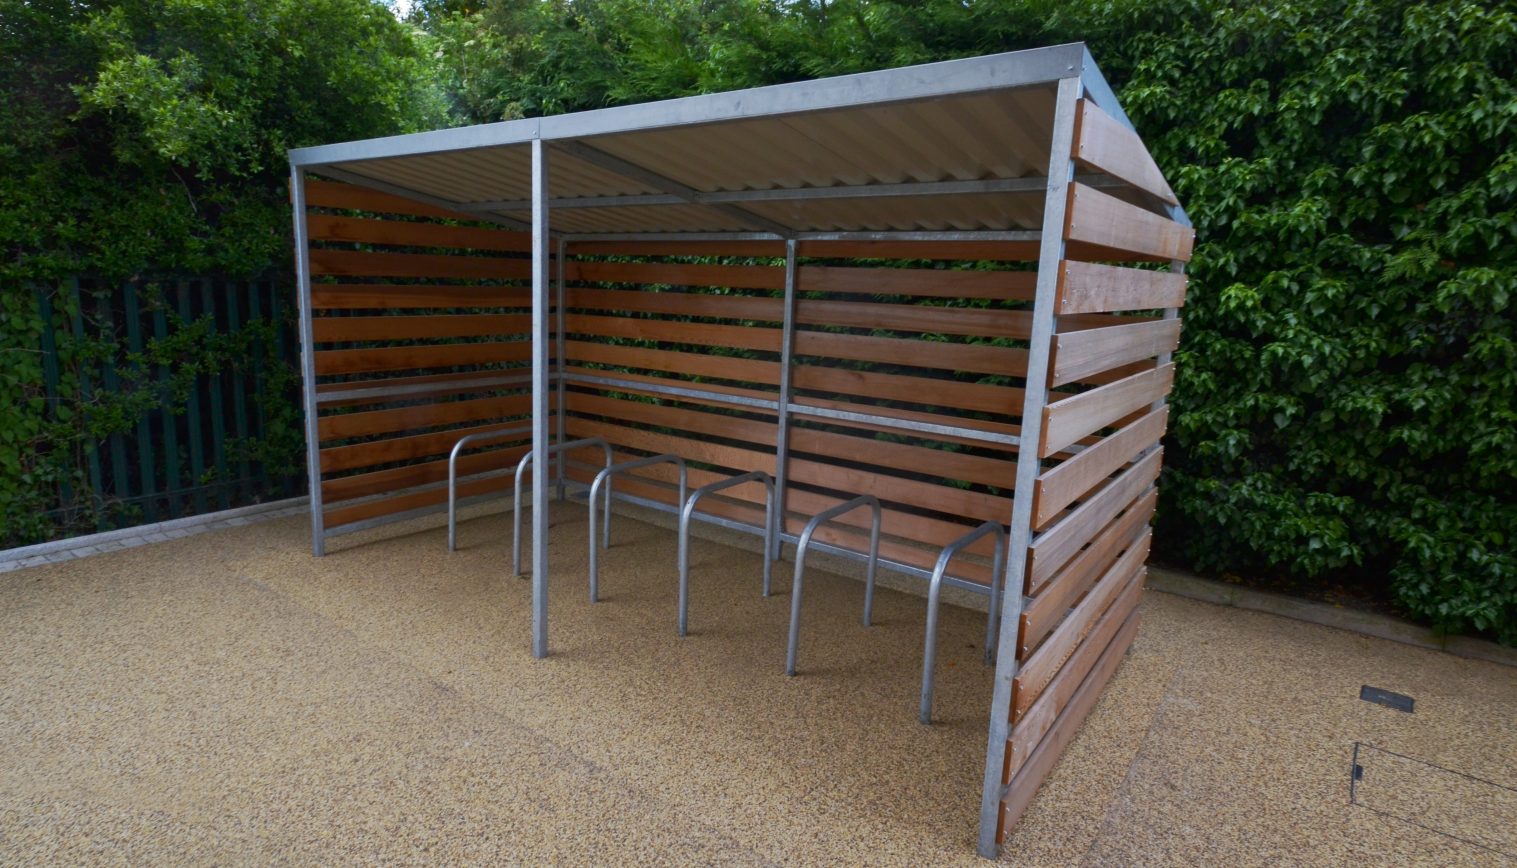 All Saints CE Junior School – 1st Timber Cycle Shelter